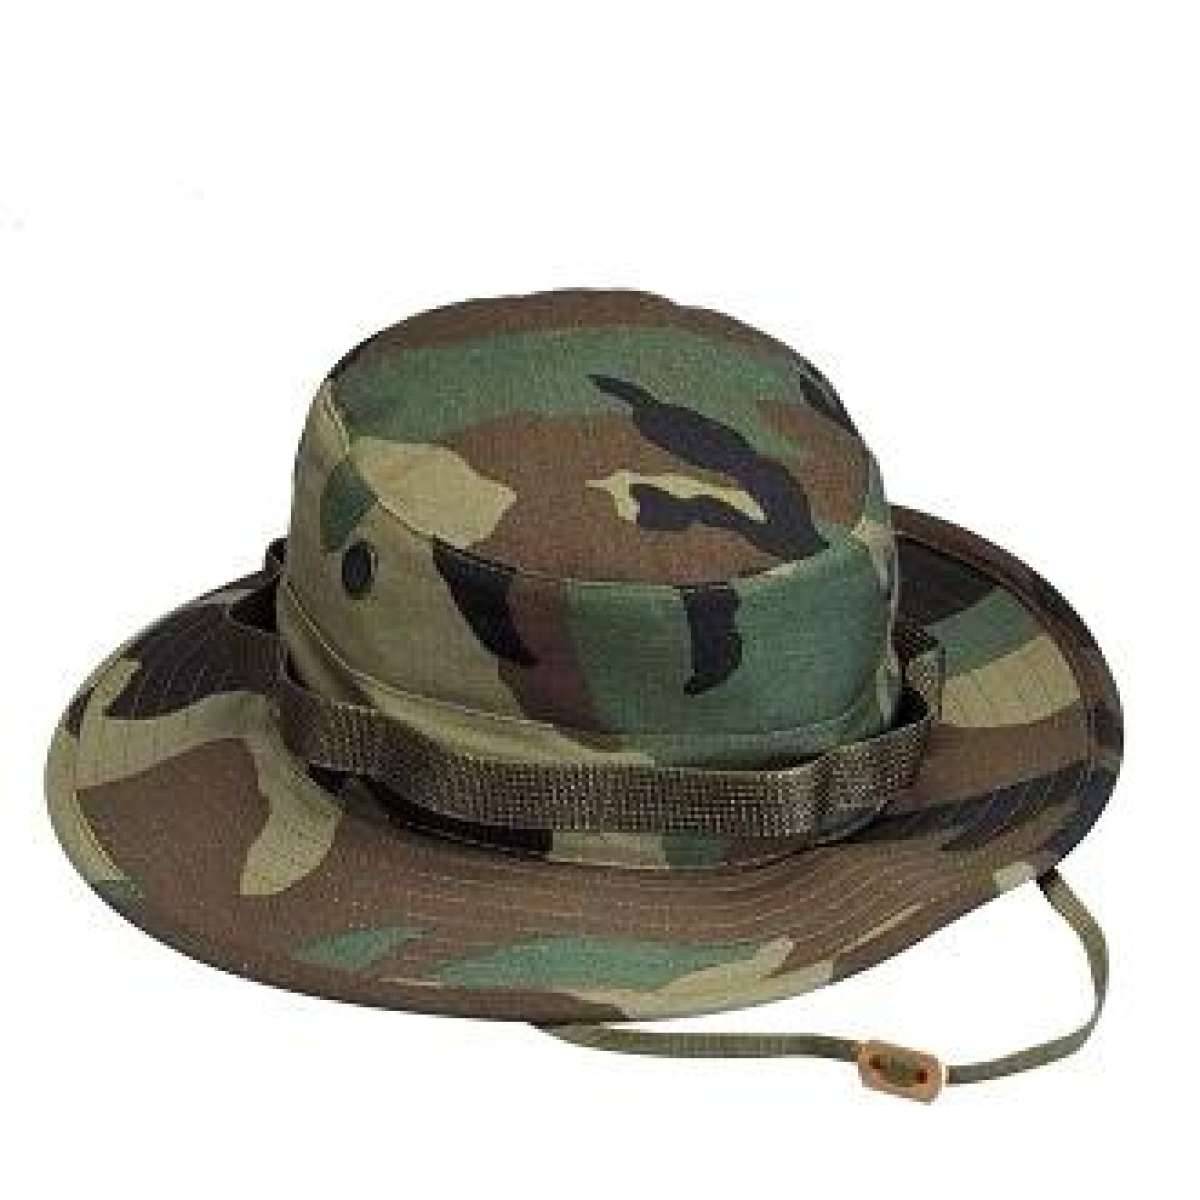 Outdoor Tactticall Miletarry Boonie Hat for Camping Hiking and Hnting